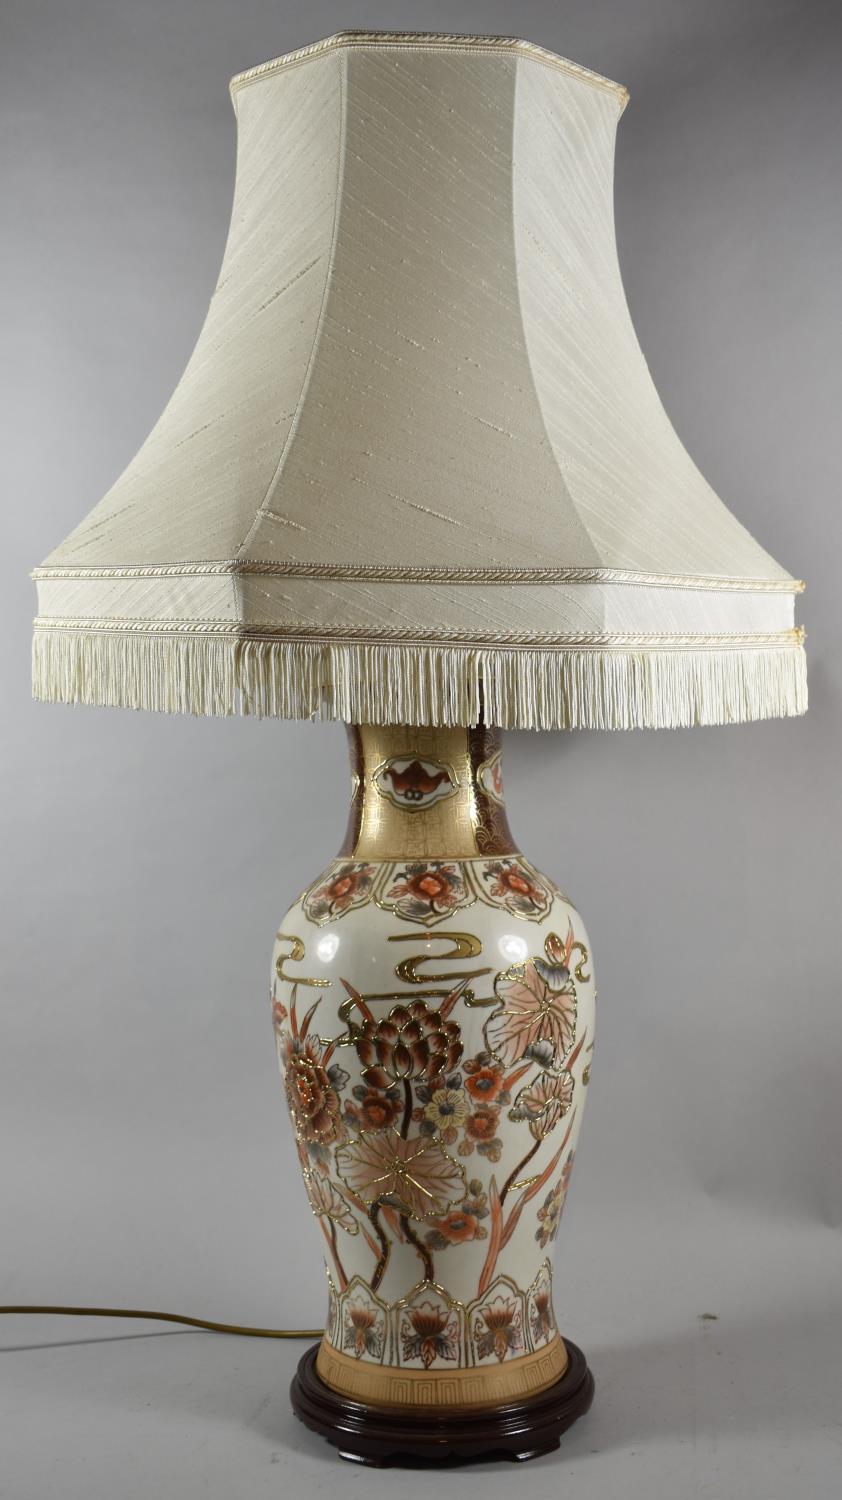 A Large Modern Oriental Vase Shaped Table Lamp with Shade, Vase 50cm High